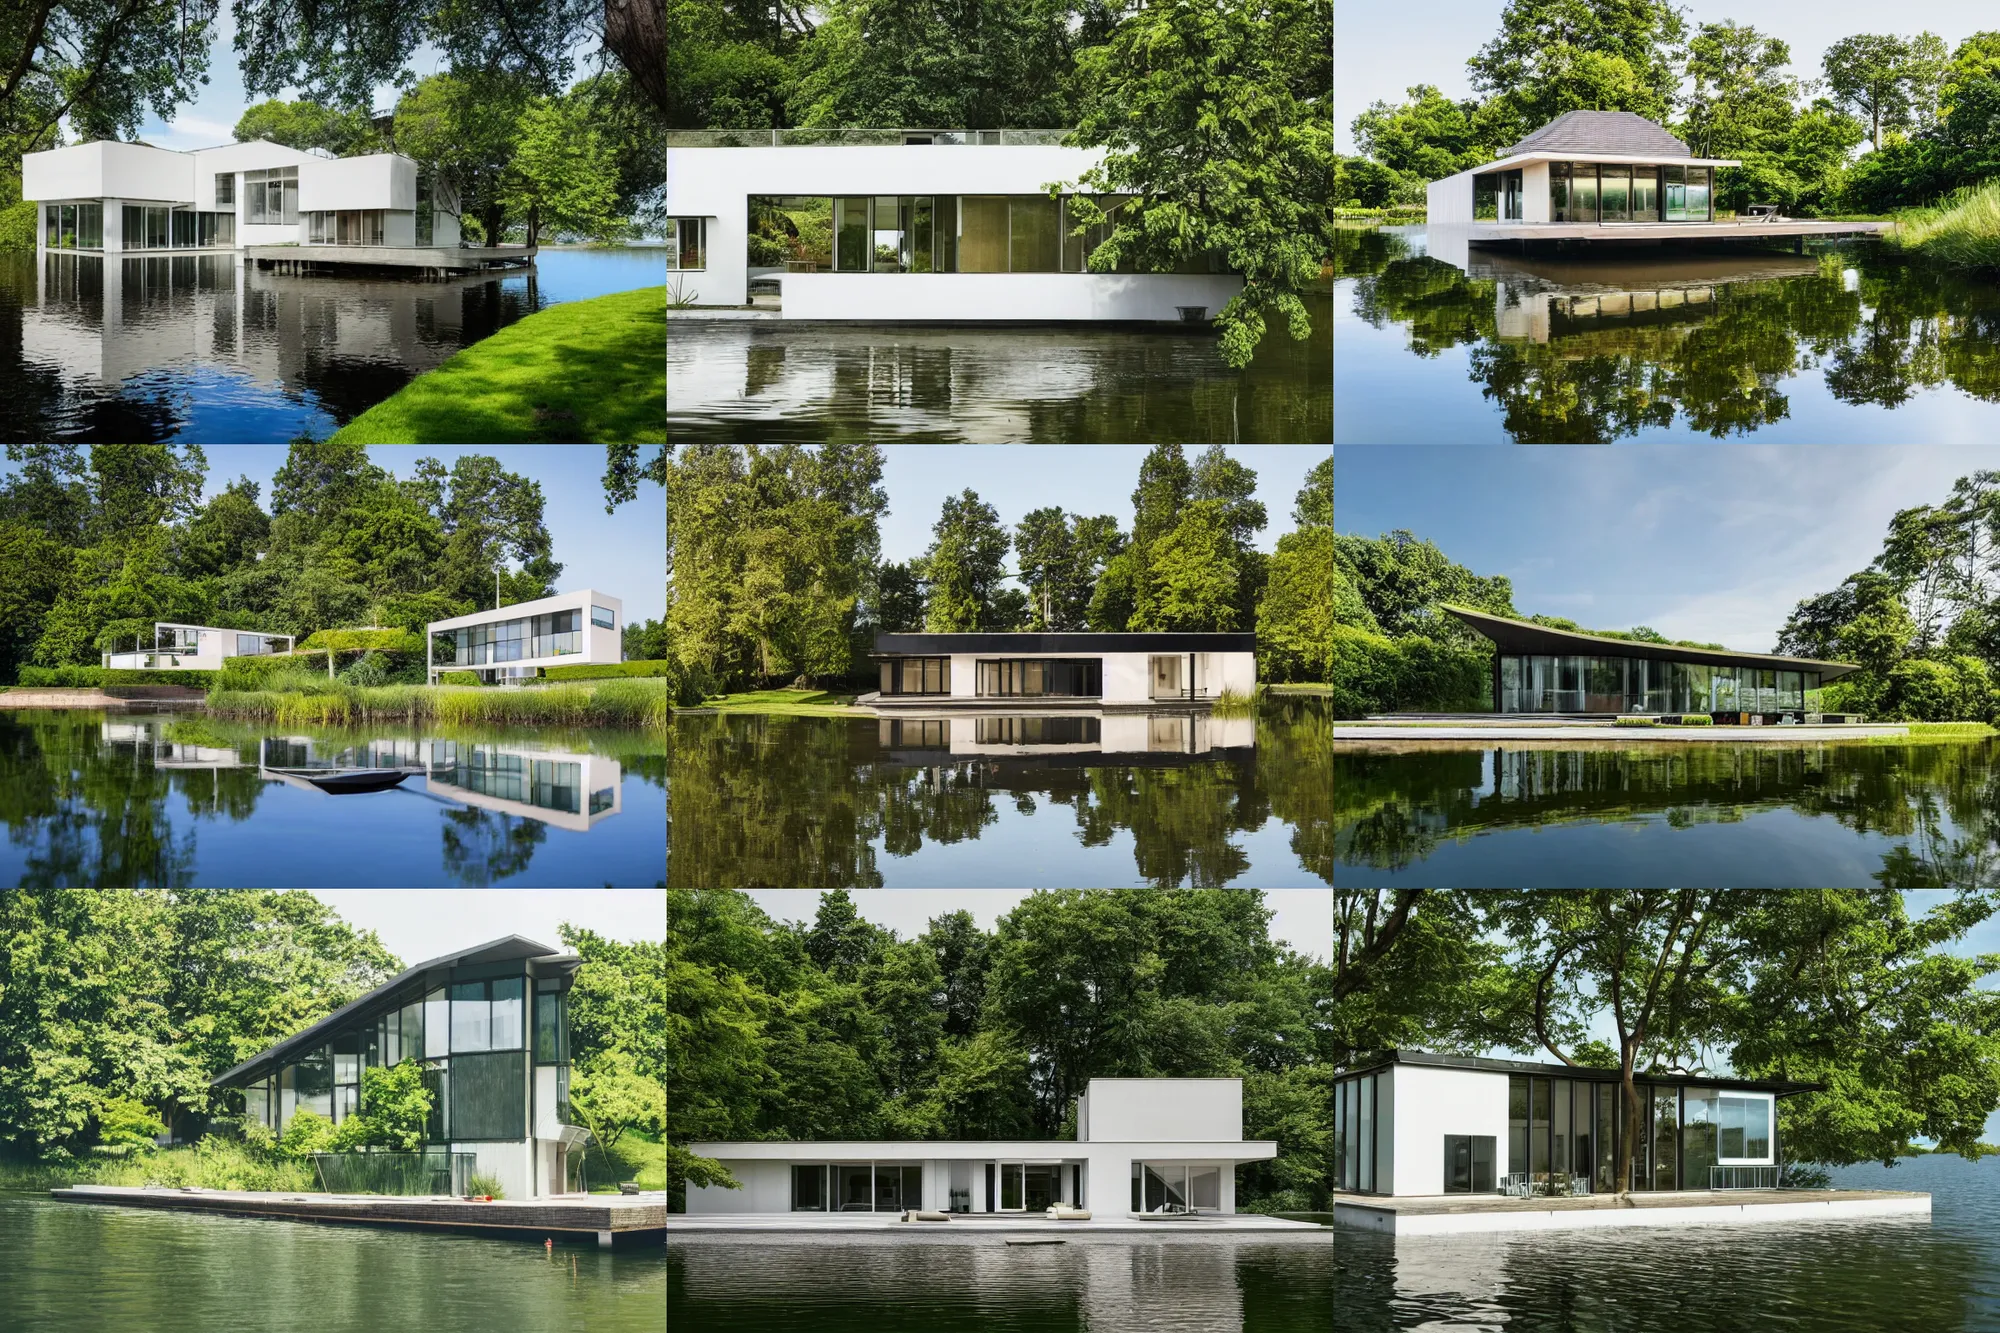 Prompt: architectural digest photo, wide angle, frontal view of house, bauhaus style house by a lake, summer, single floor, flat roof, patio, lush vegetation trees bushes, secluded, calm serene relaxed, small dock, rowing boat, bushes, reflection in water, ultra realistic 8 k